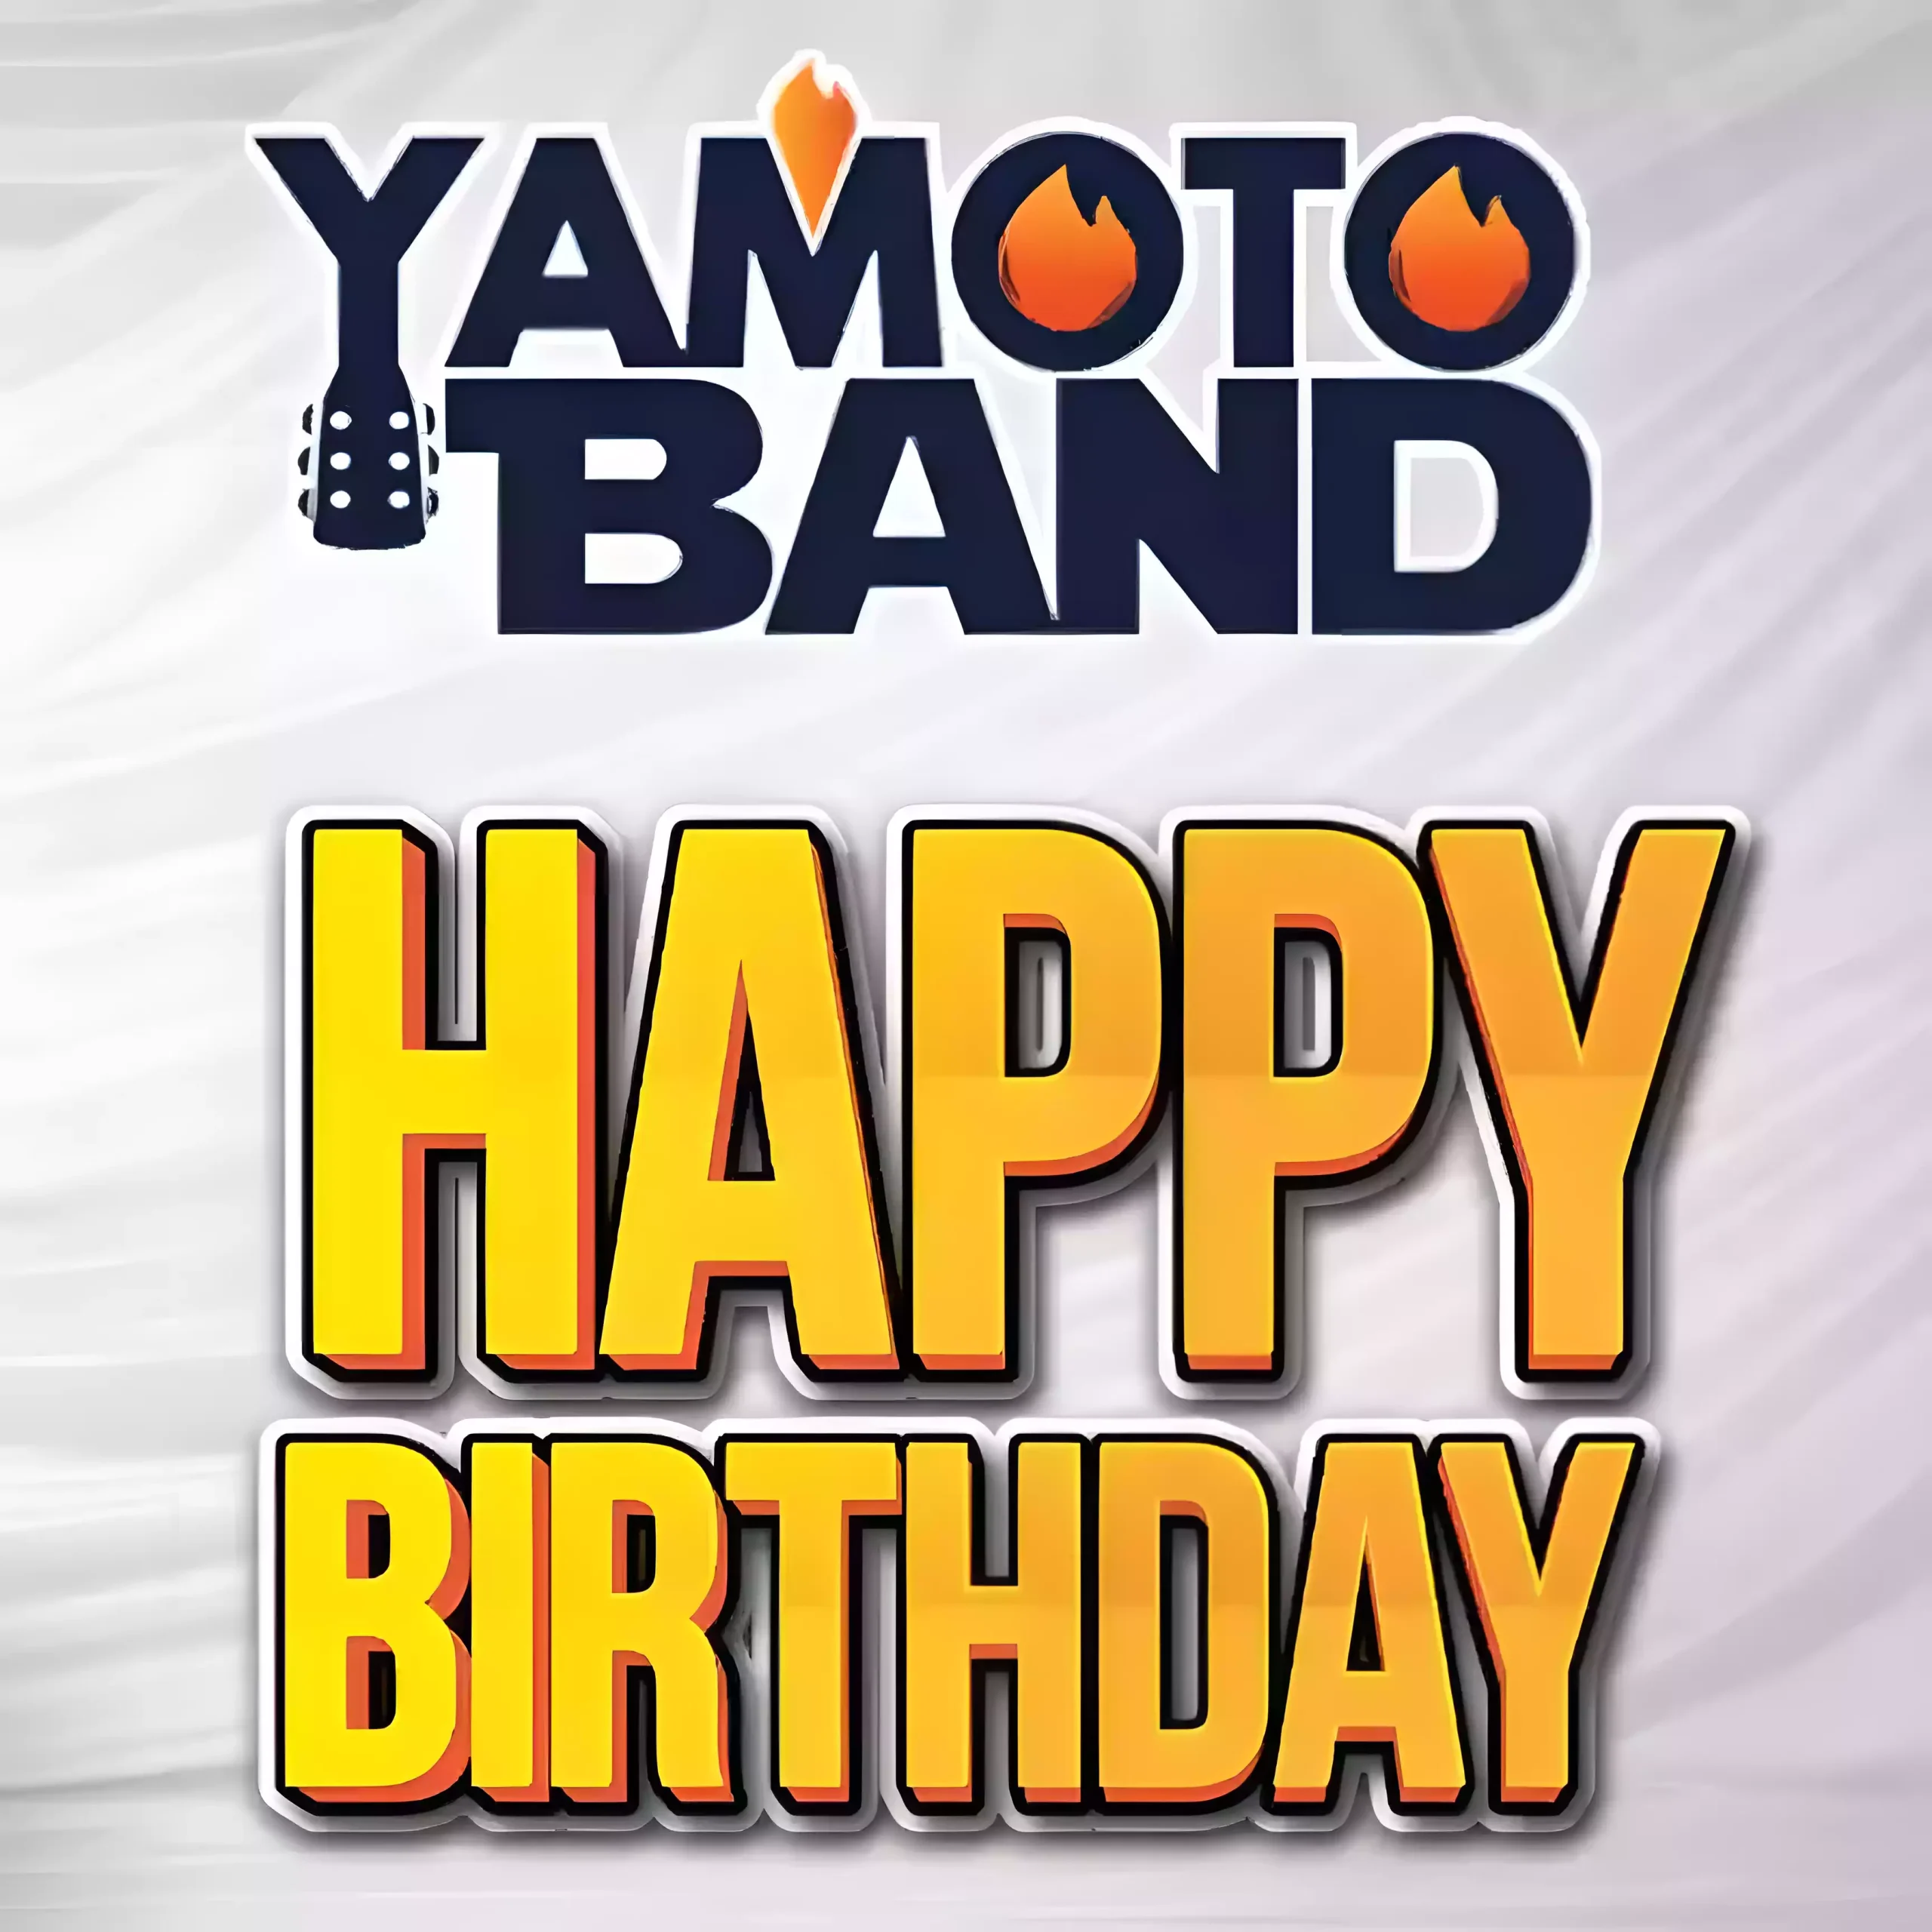 Yamoto Band Happy Birthday Mp3 Download scaled